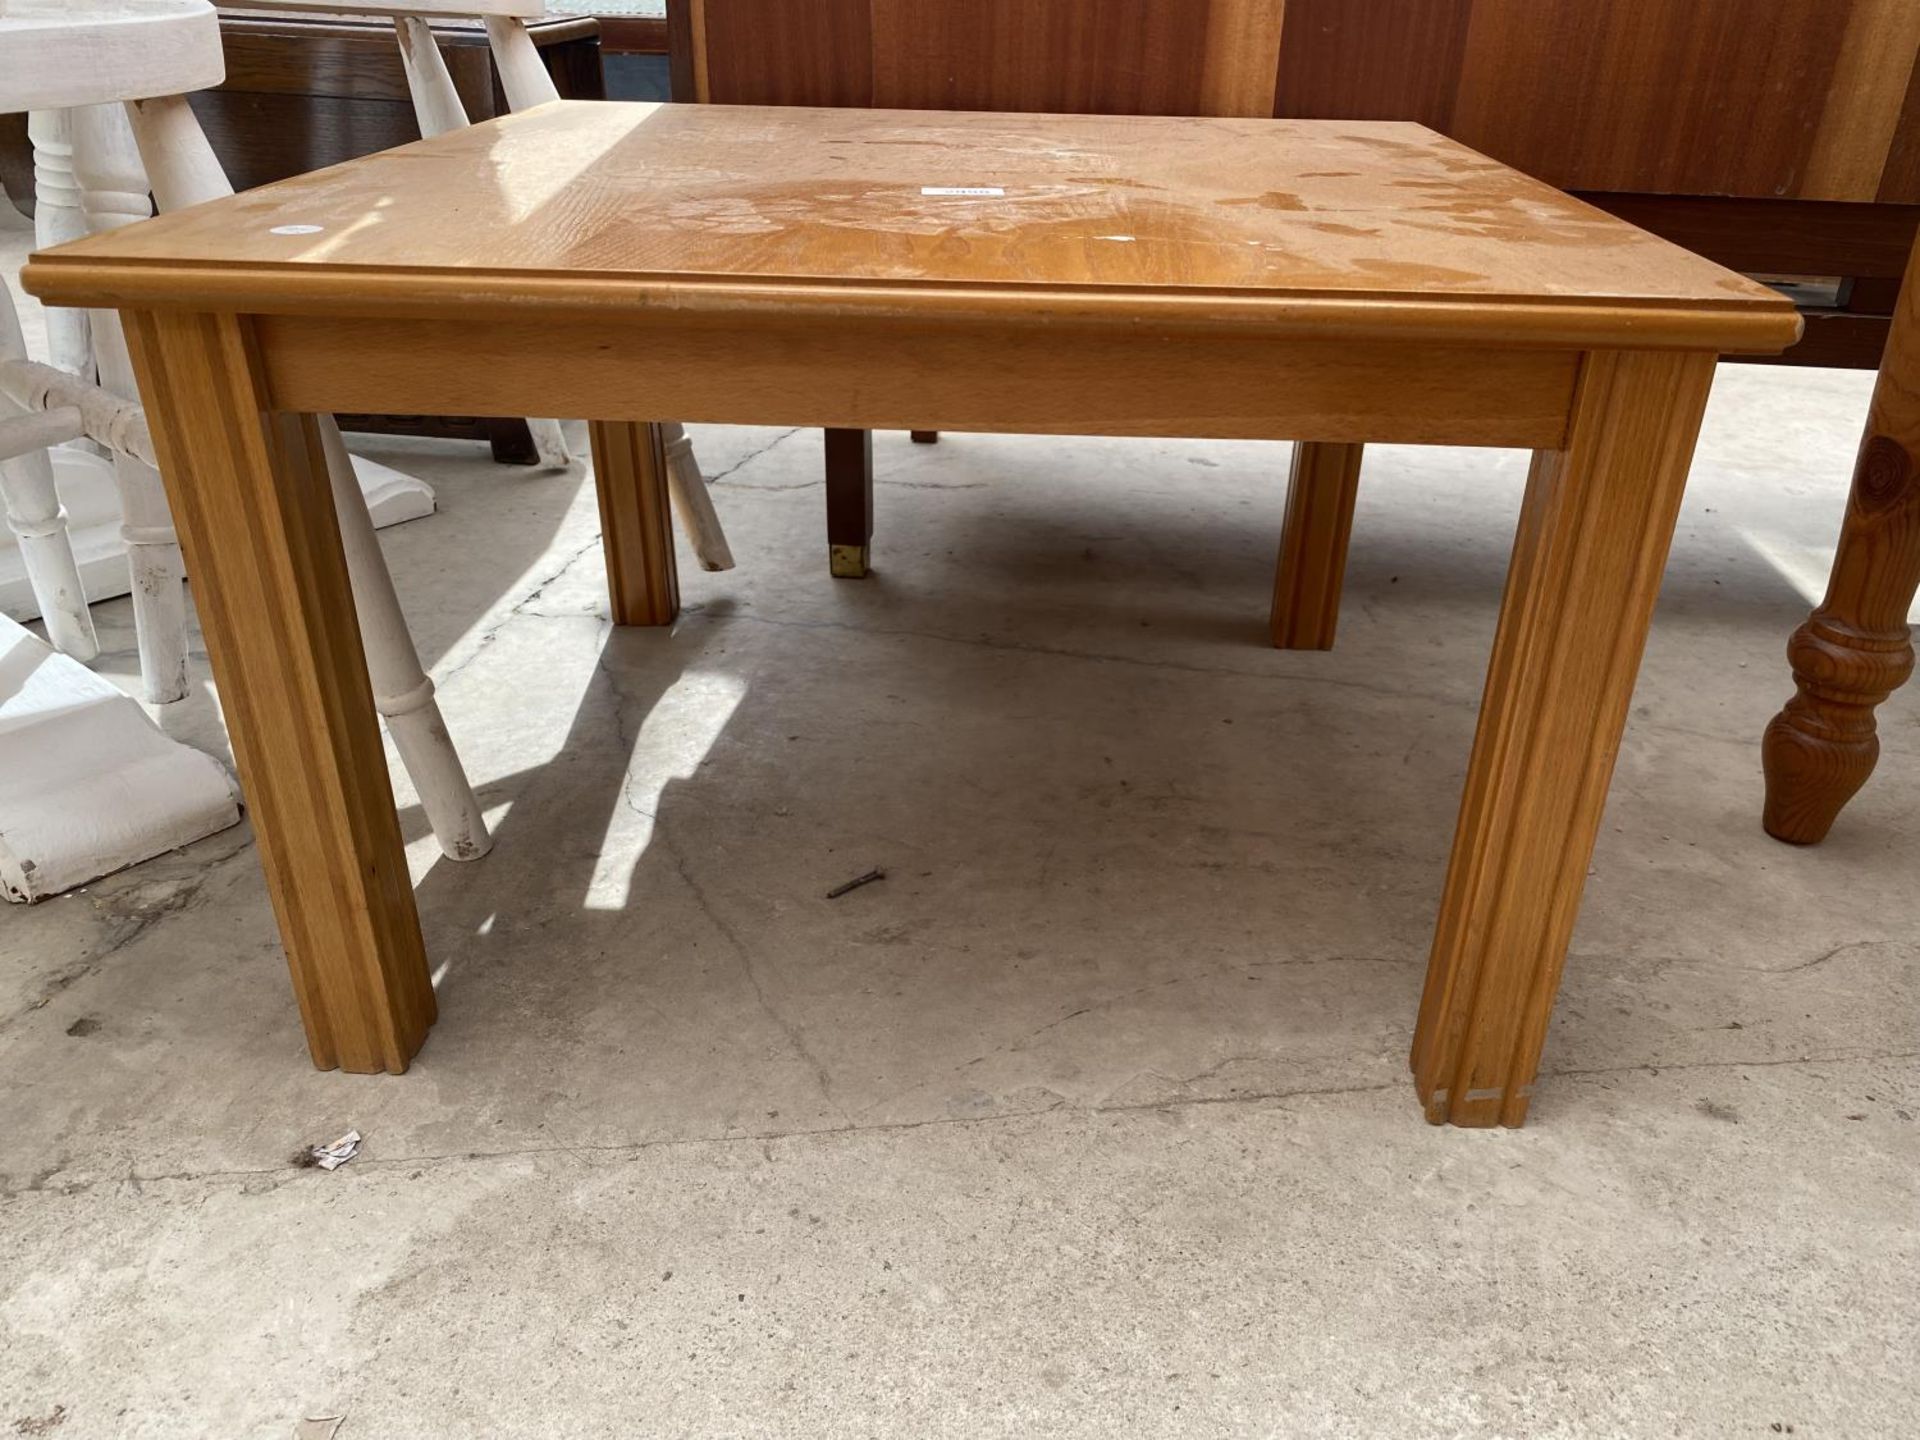 A MODERN OAK LAMP TABLE, 24" SQUARE - Image 2 of 2